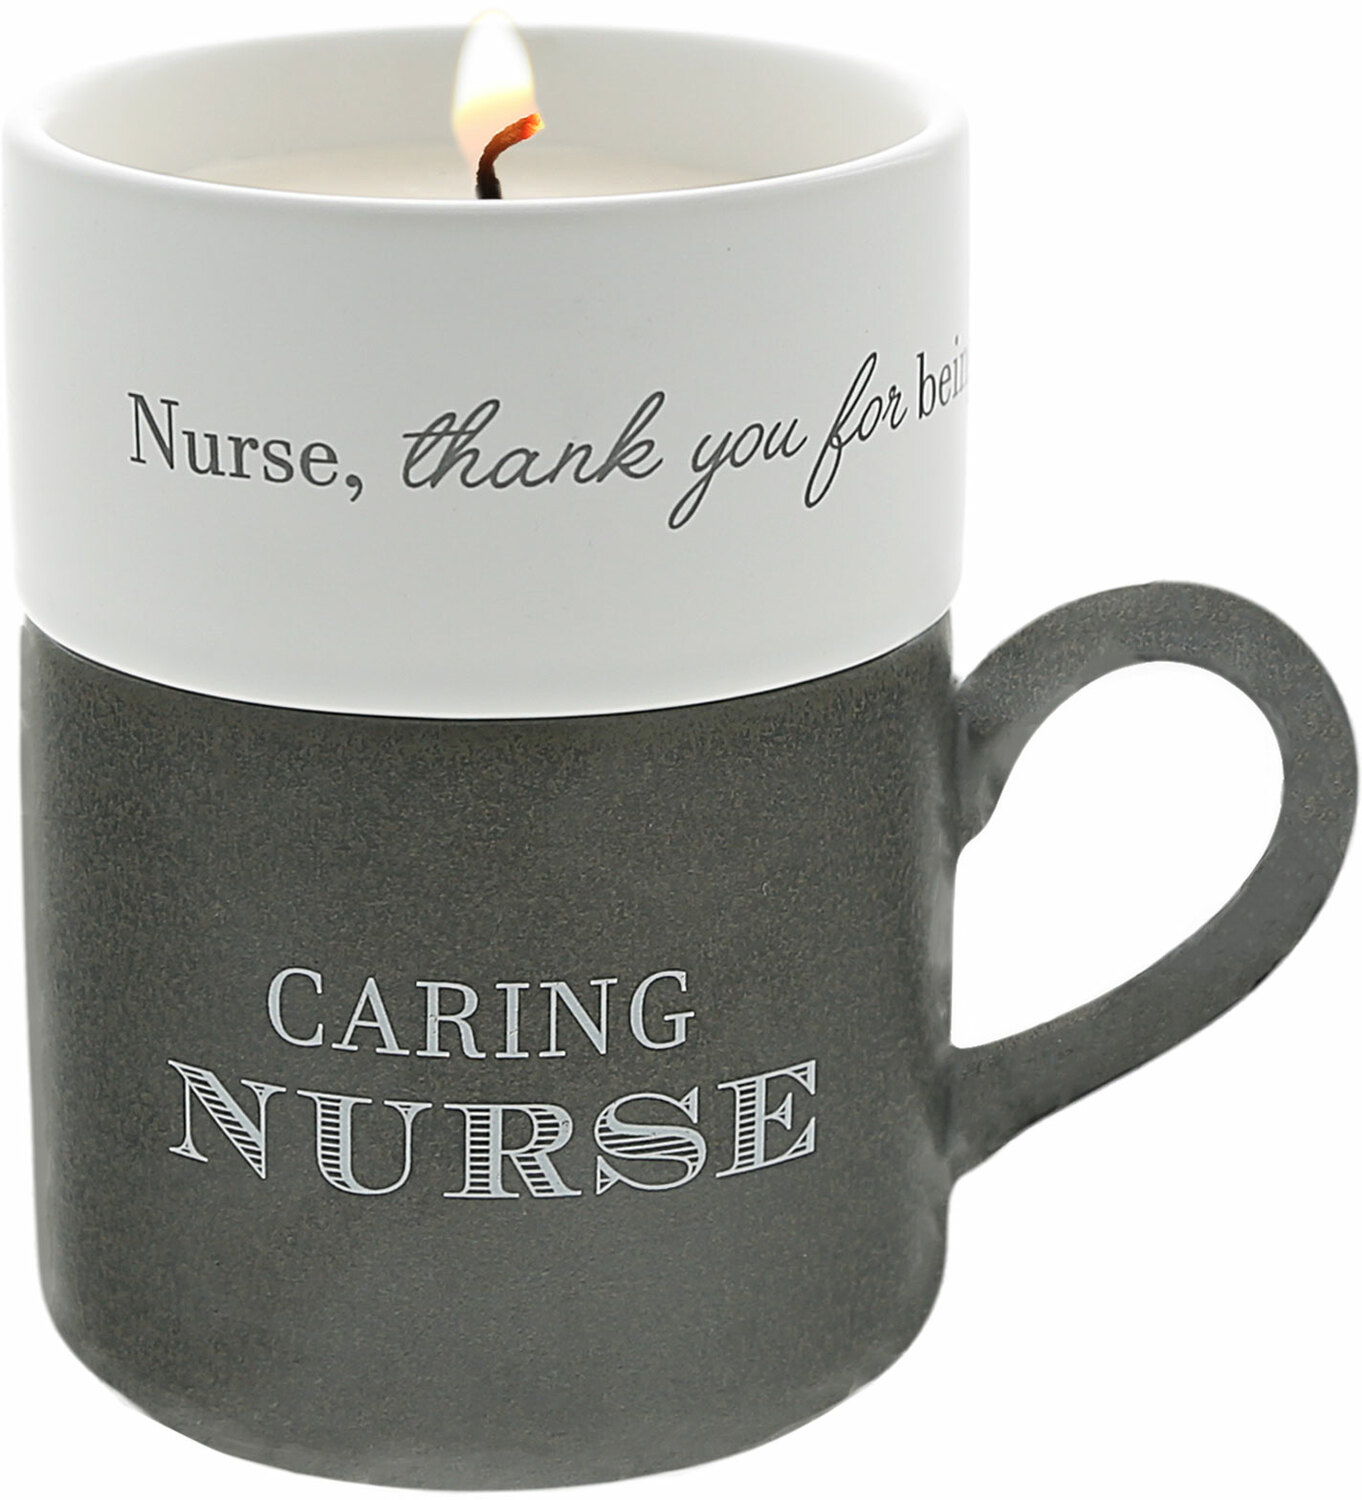 Nurse by Filled with Warmth - Nurse - Stacking Mug and Candle Set
100% Soy Wax Scent: Tranquility